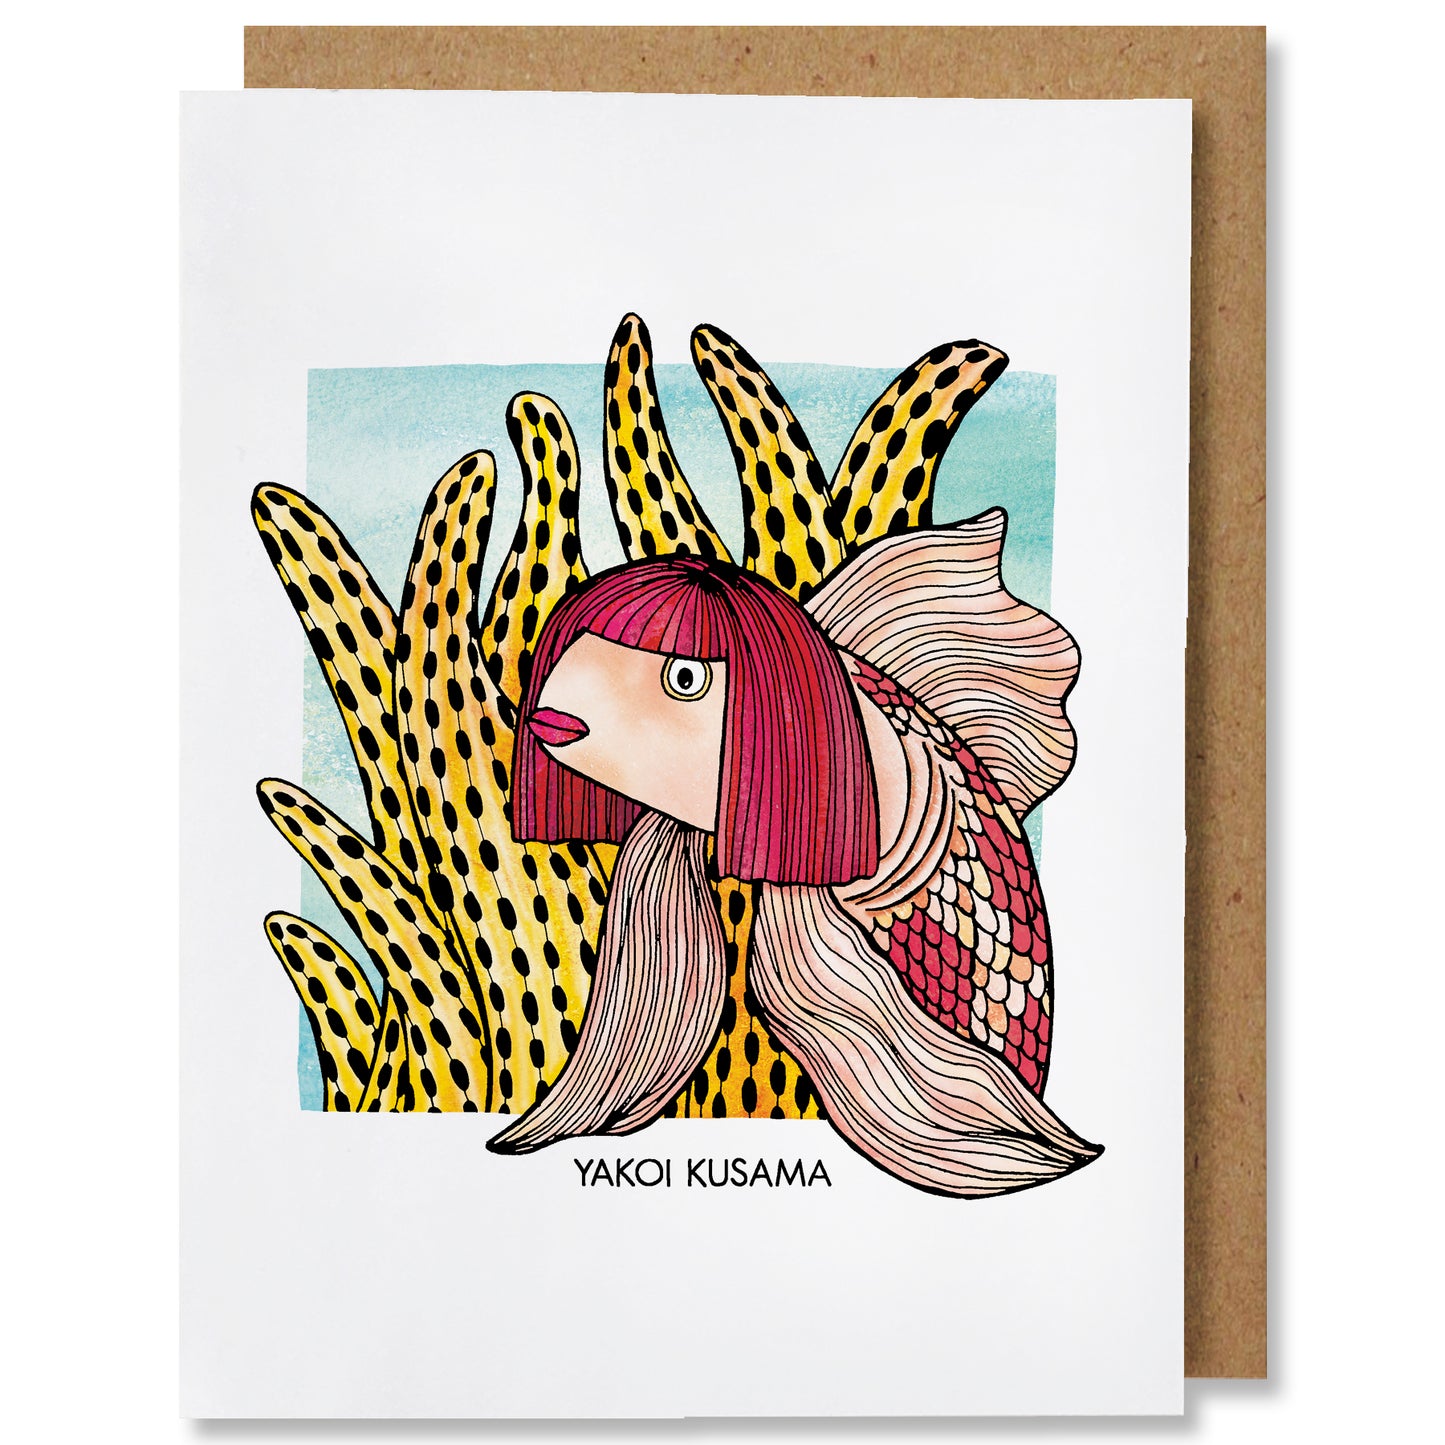 An illustrated card featuring Japanese artist Yayoi Kusama as a beautiful fish with red hair and pink lips with yellow and black spotted coral in the background and 'Yakoi Kusama' on the bottom